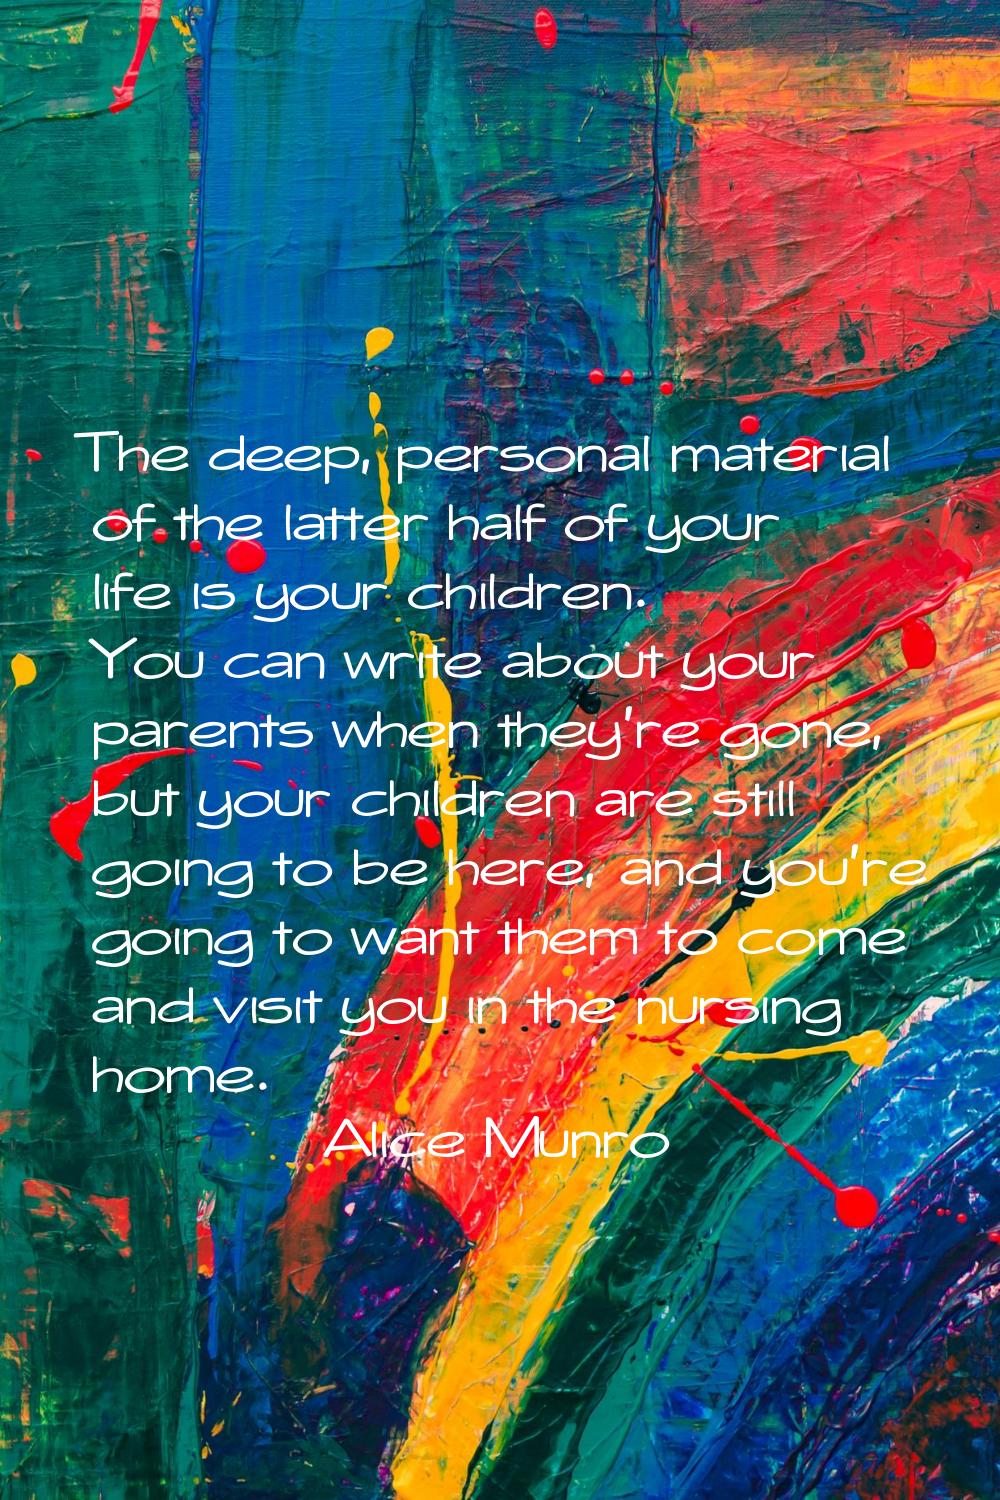 The deep, personal material of the latter half of your life is your children. You can write about y